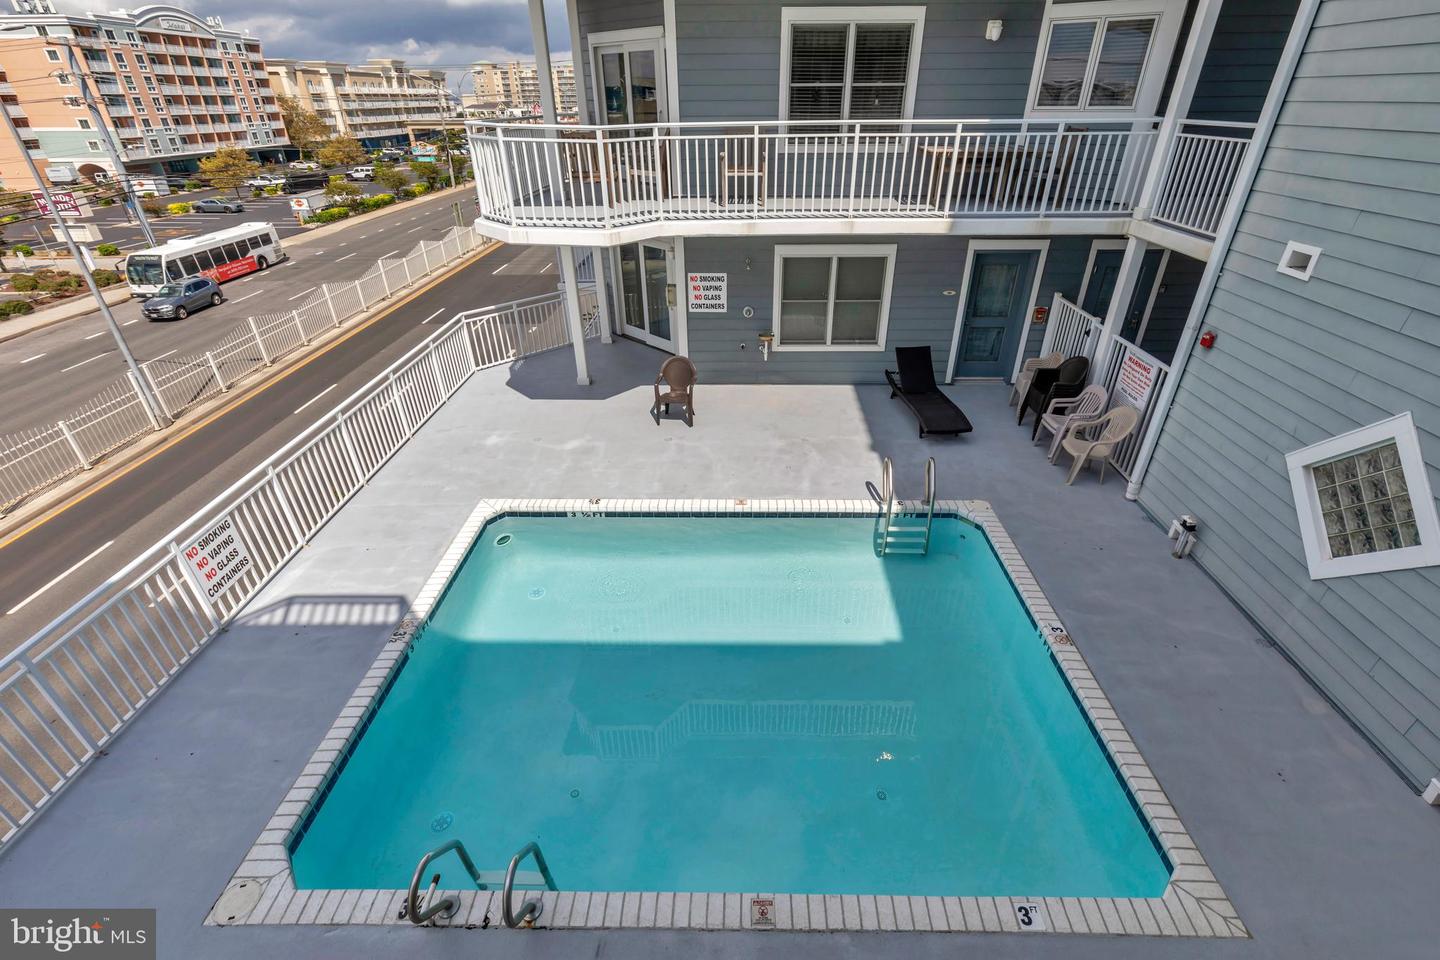 MDWO2015722-802606210122-2024-02-22-09-49-25 18 41st St #302 | Ocean City, MD Real Estate For Sale | MLS# Mdwo2015722  - 1st Choice Properties